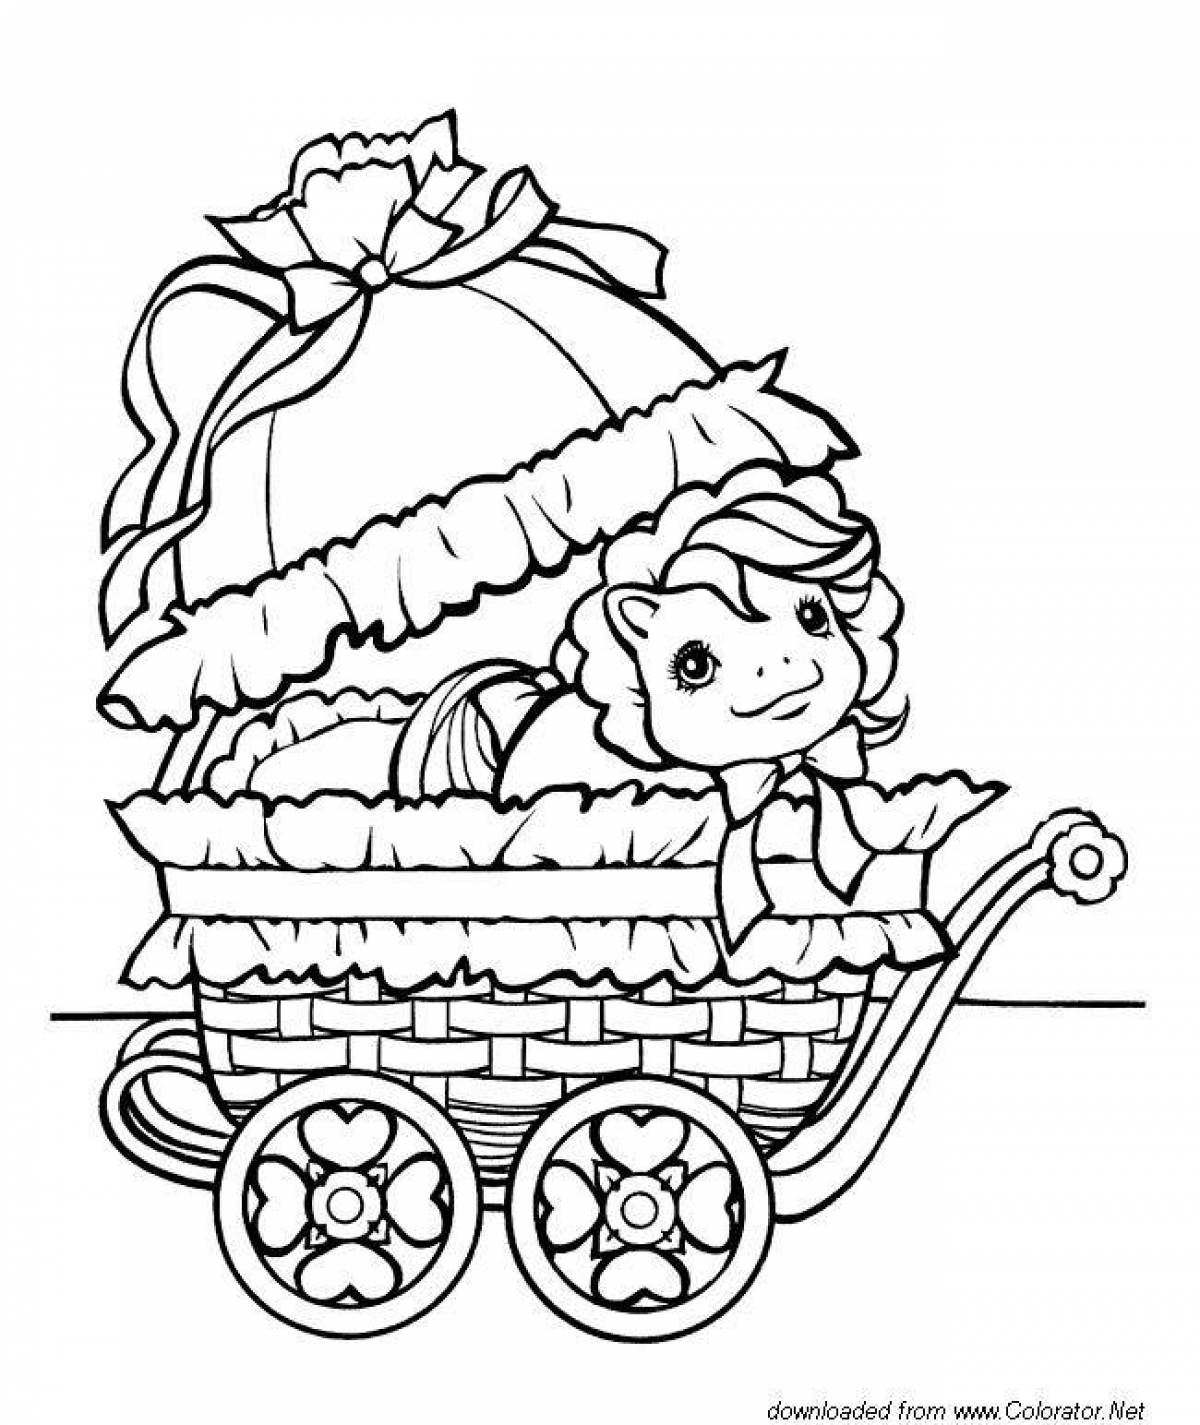 Joyful charon baby all coloring pages